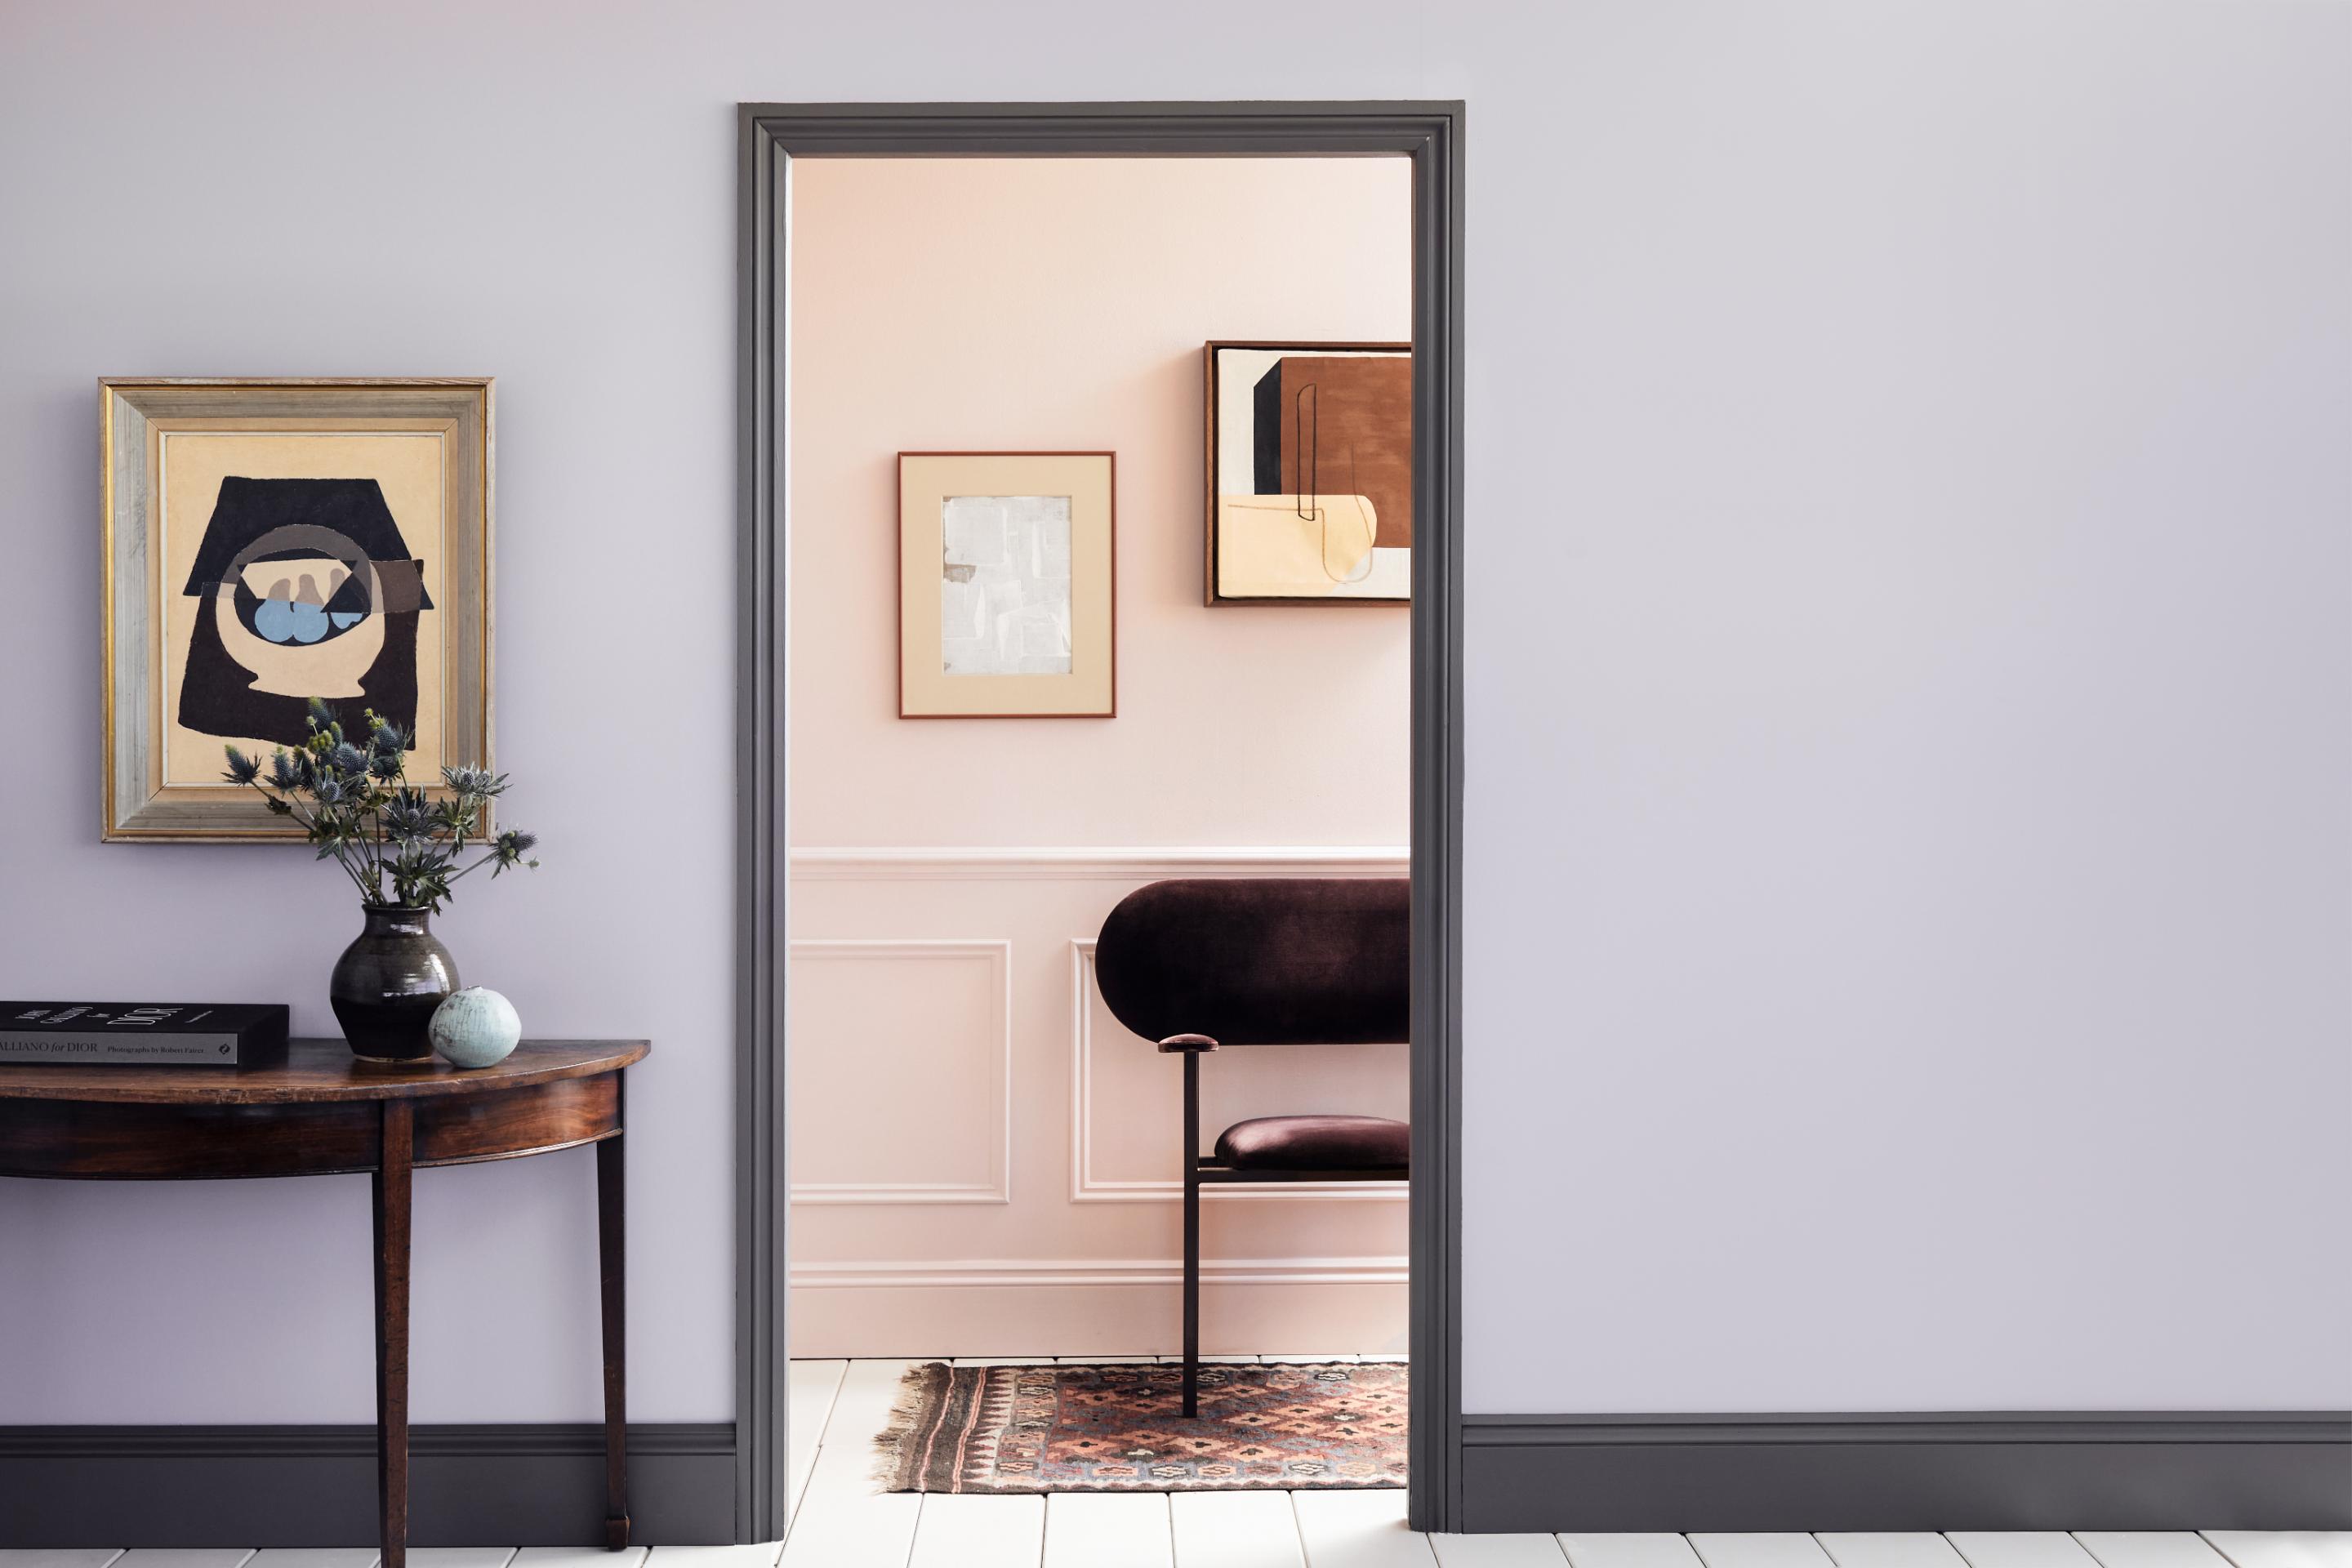 15 Best Shades Of Purple To Paint A Bedroom